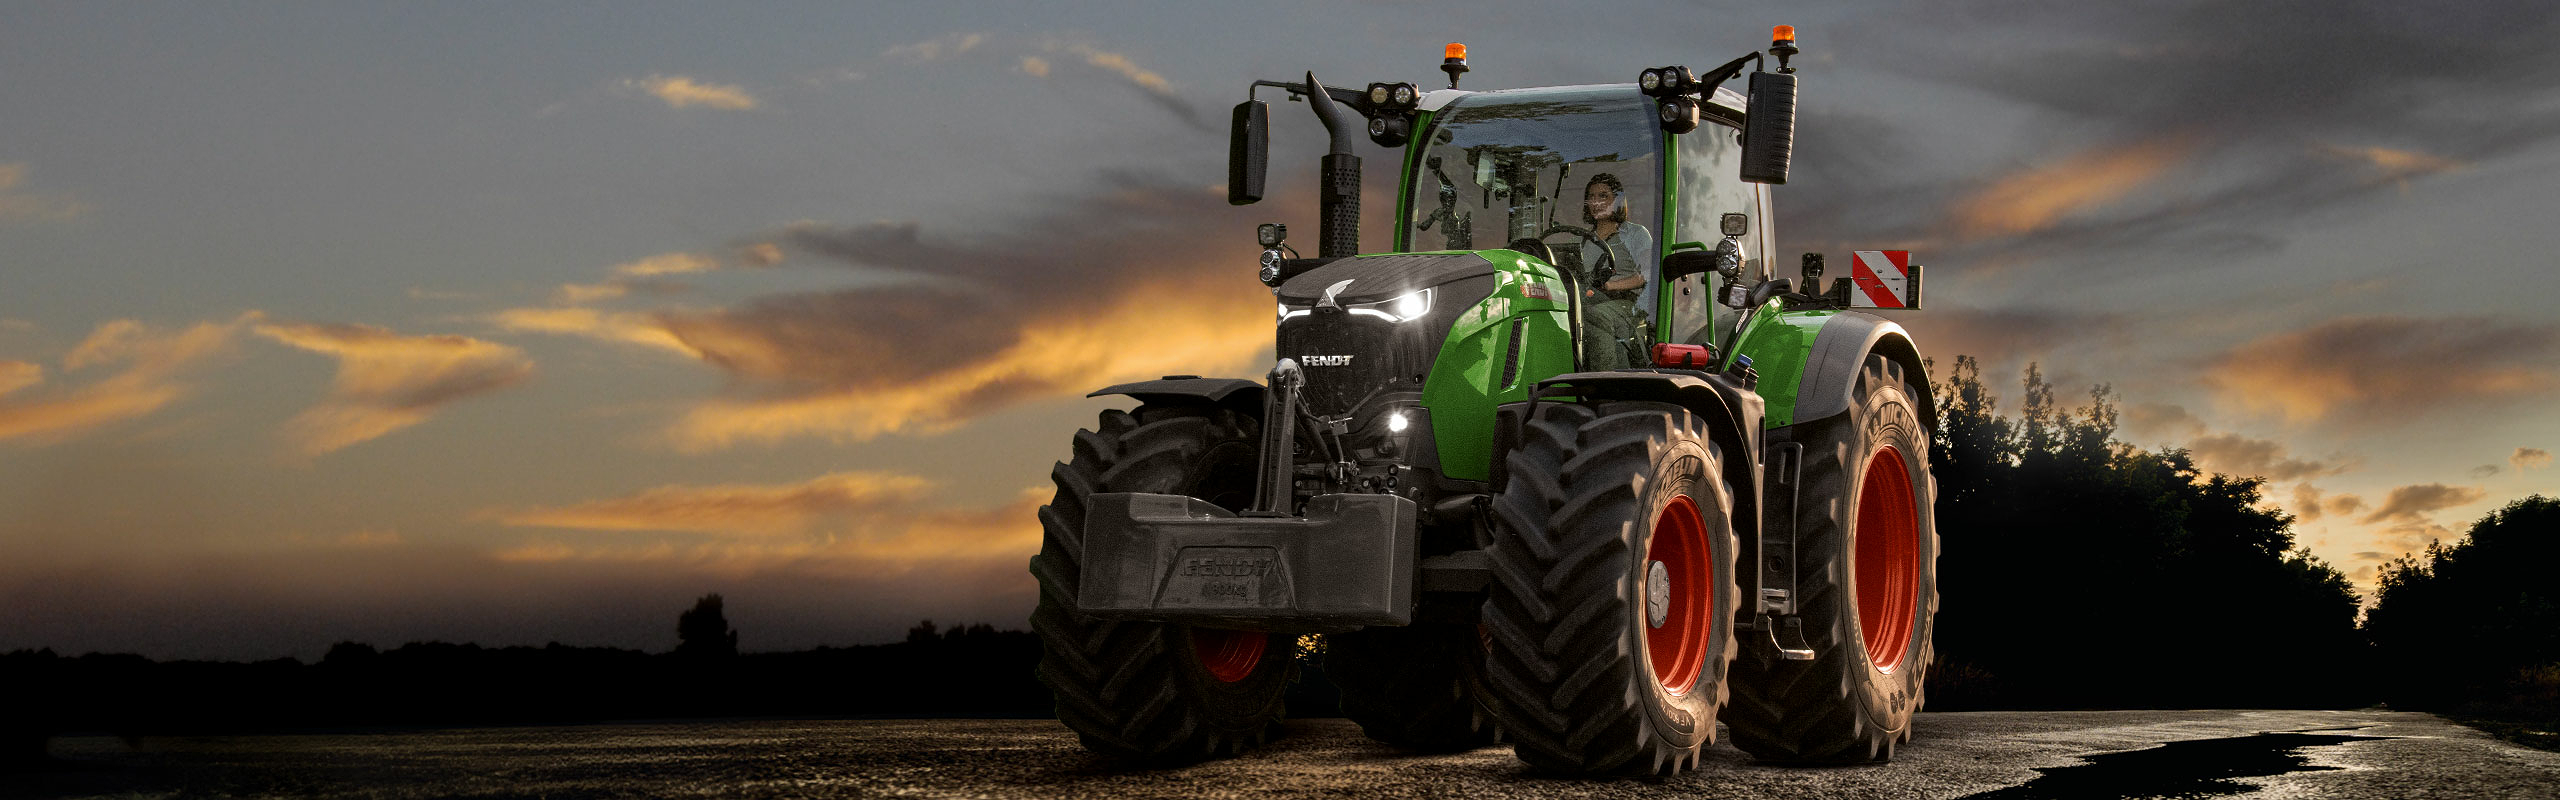 A Fendt 700 Vario Gen7 on the road in front of a dramatic sunset sky